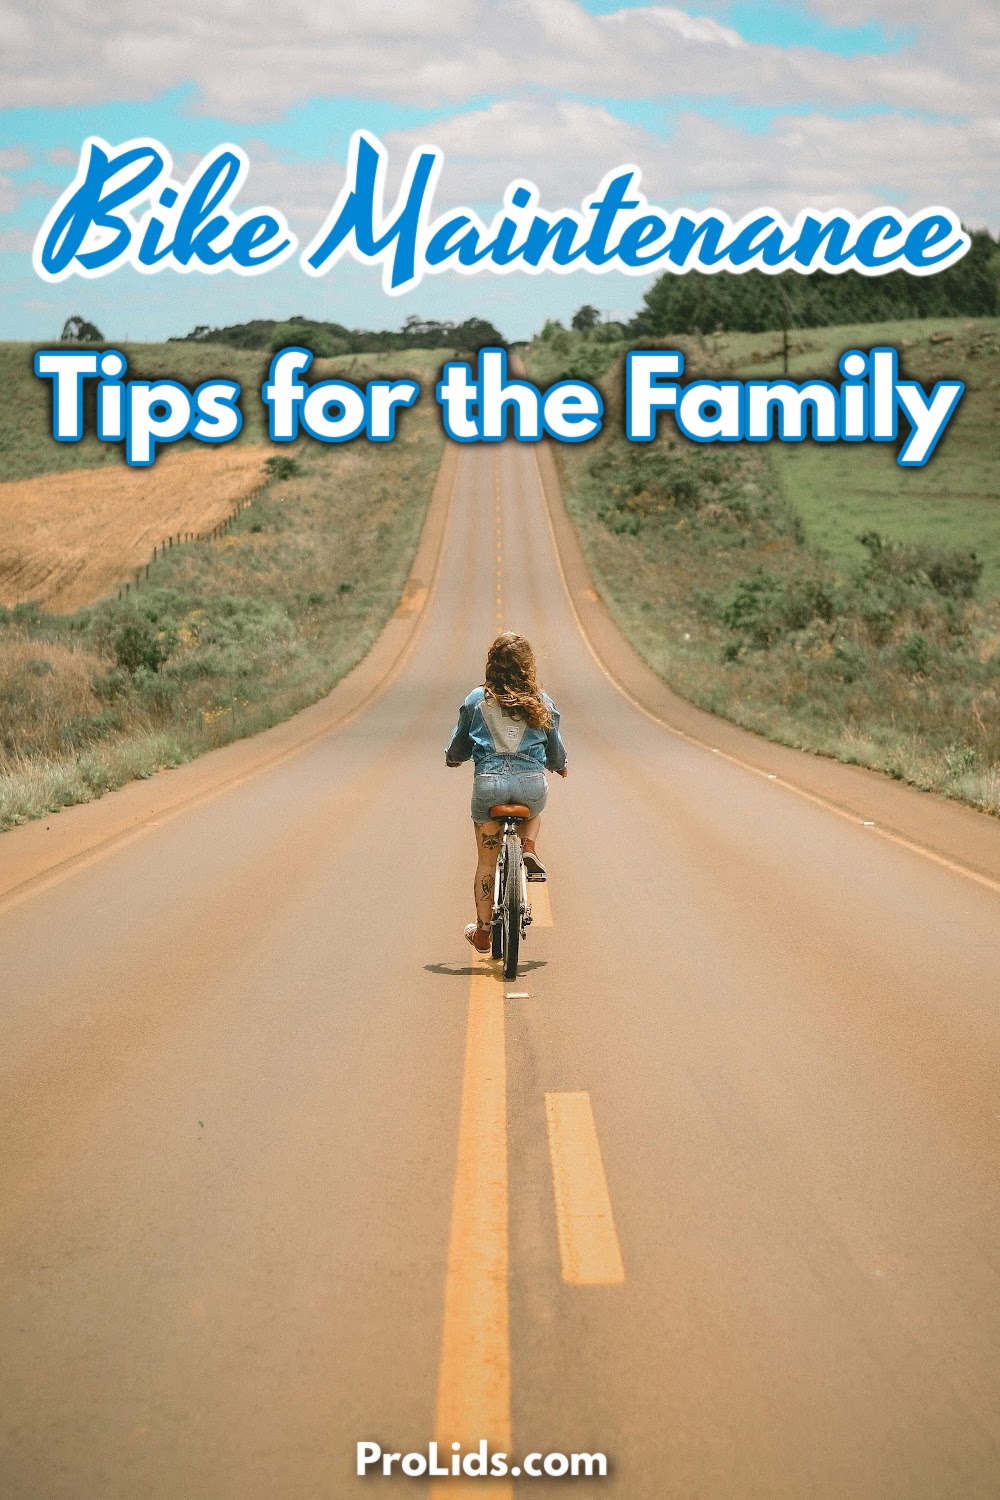 The best bike maintenance tips for the family can help us keep our bikes lasting longer and could even keep us safer.